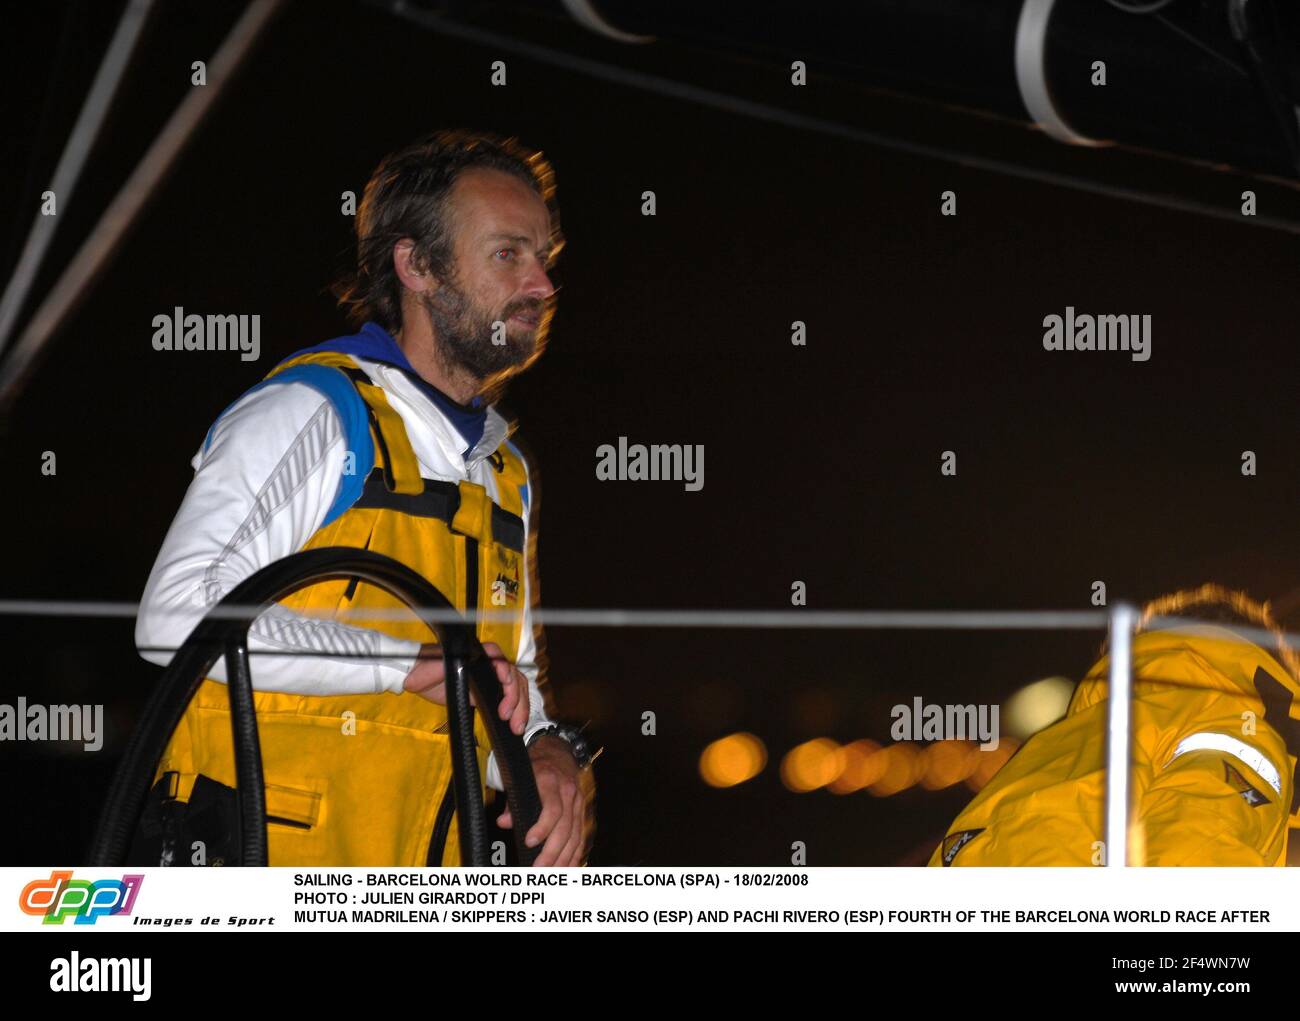 SAILING - BARCELONA WOLRD RACE - BARCELONA (SPA) - 18/02/2008 PHOTO : JULIEN GIRARDOT / DPPI MUTUA MADRILENA / SKIPPERS : JAVIER SANSO (ESP) AND PACHI RIVERO (ESP) FOURTH OF THE BARCELONA WORLD RACE AFTER 99 DAYS 12 HOURS 18 MINUTES AND 40 SECONDS Stock Photo